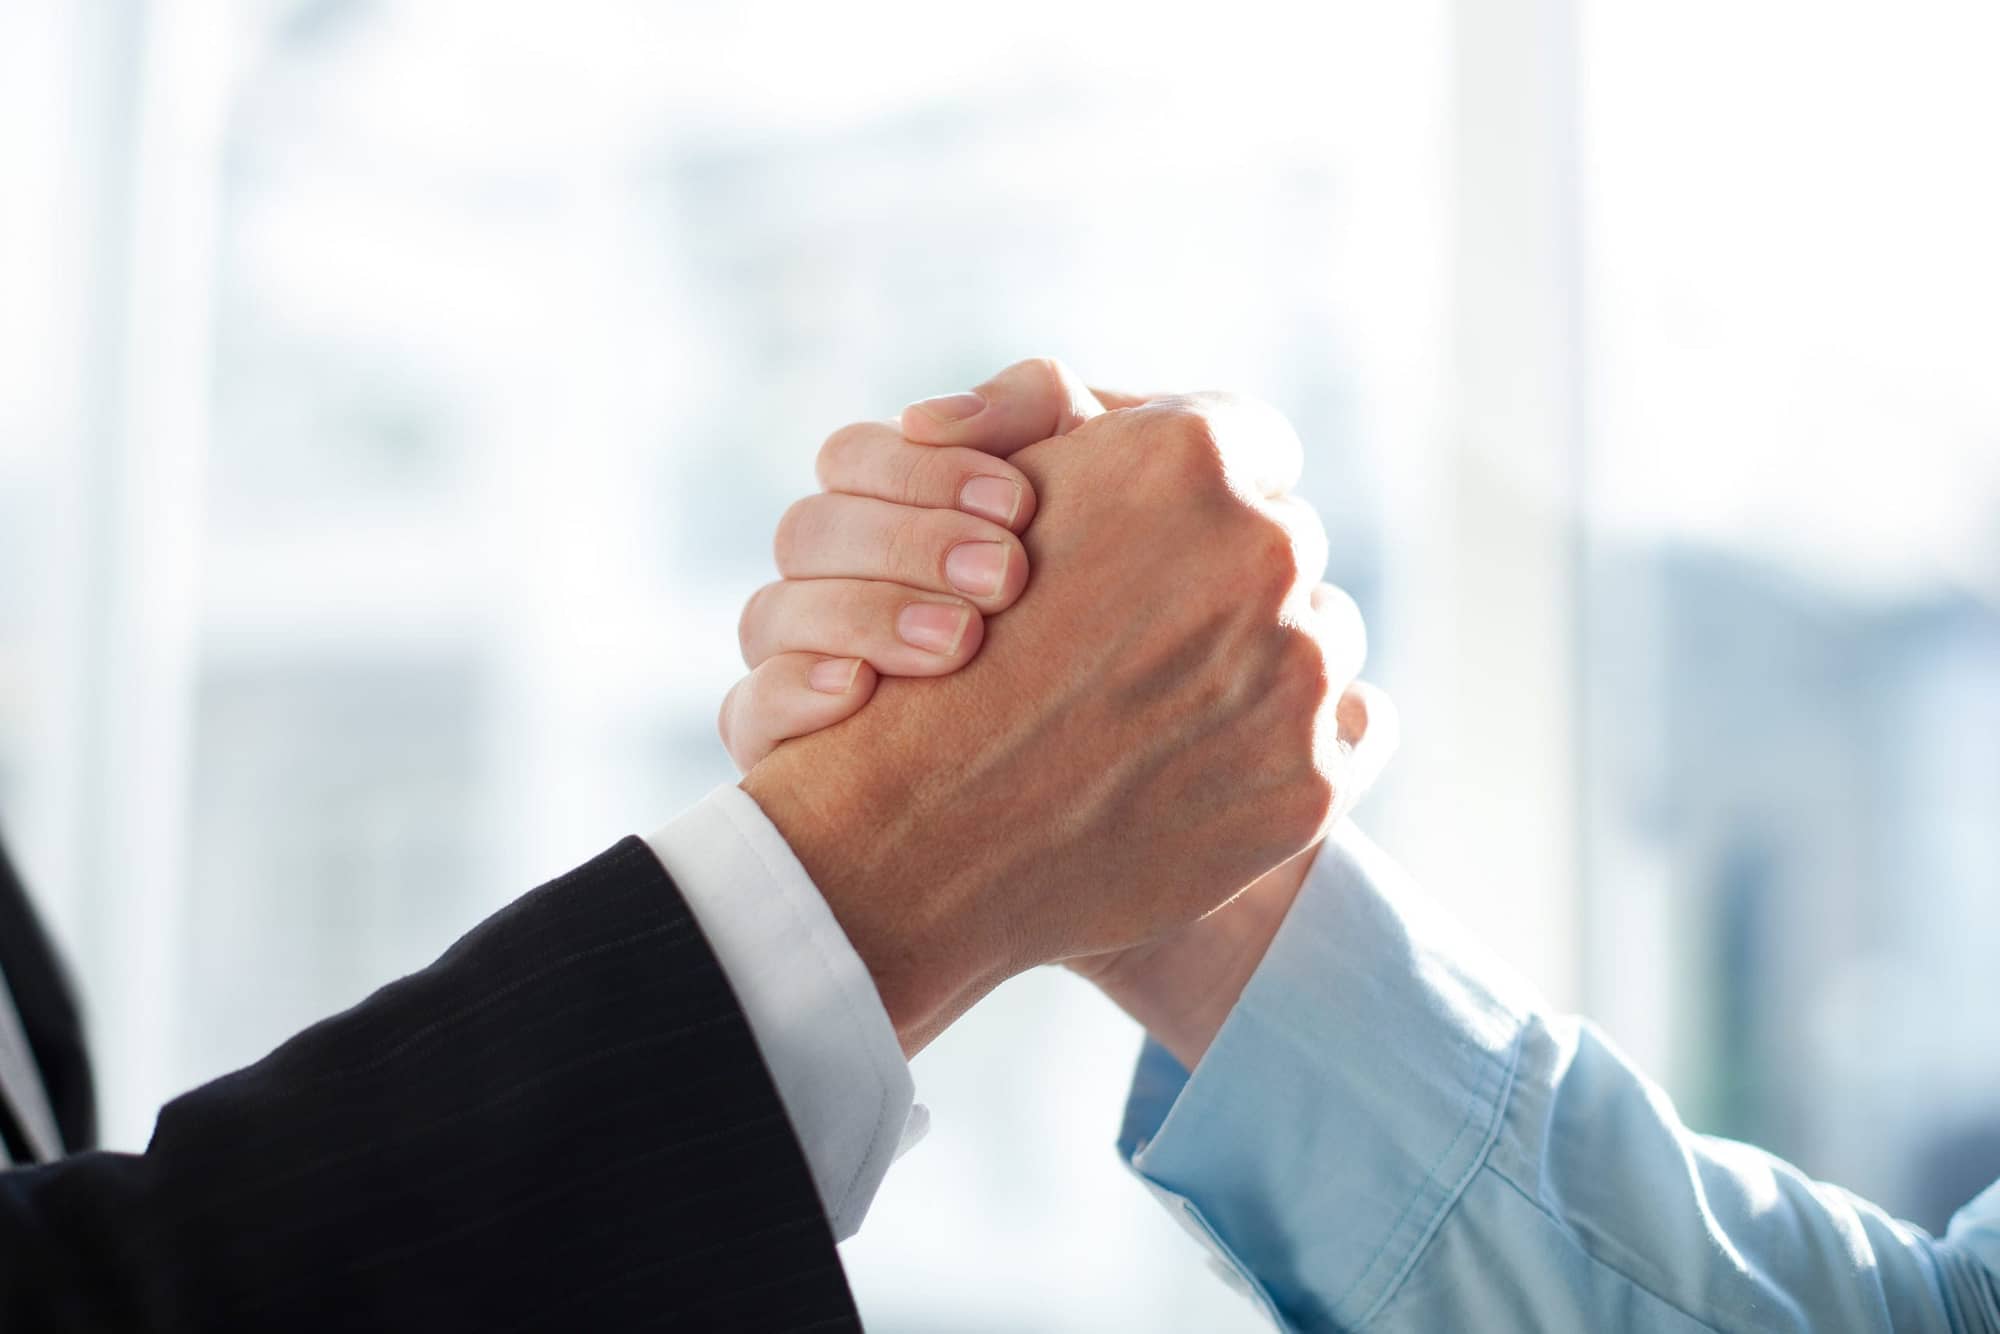 Close-up of two clasped hands of businessmen as sign of strong partnership or team. Unrecognizable men in arm wrestling gesture. Business union concept